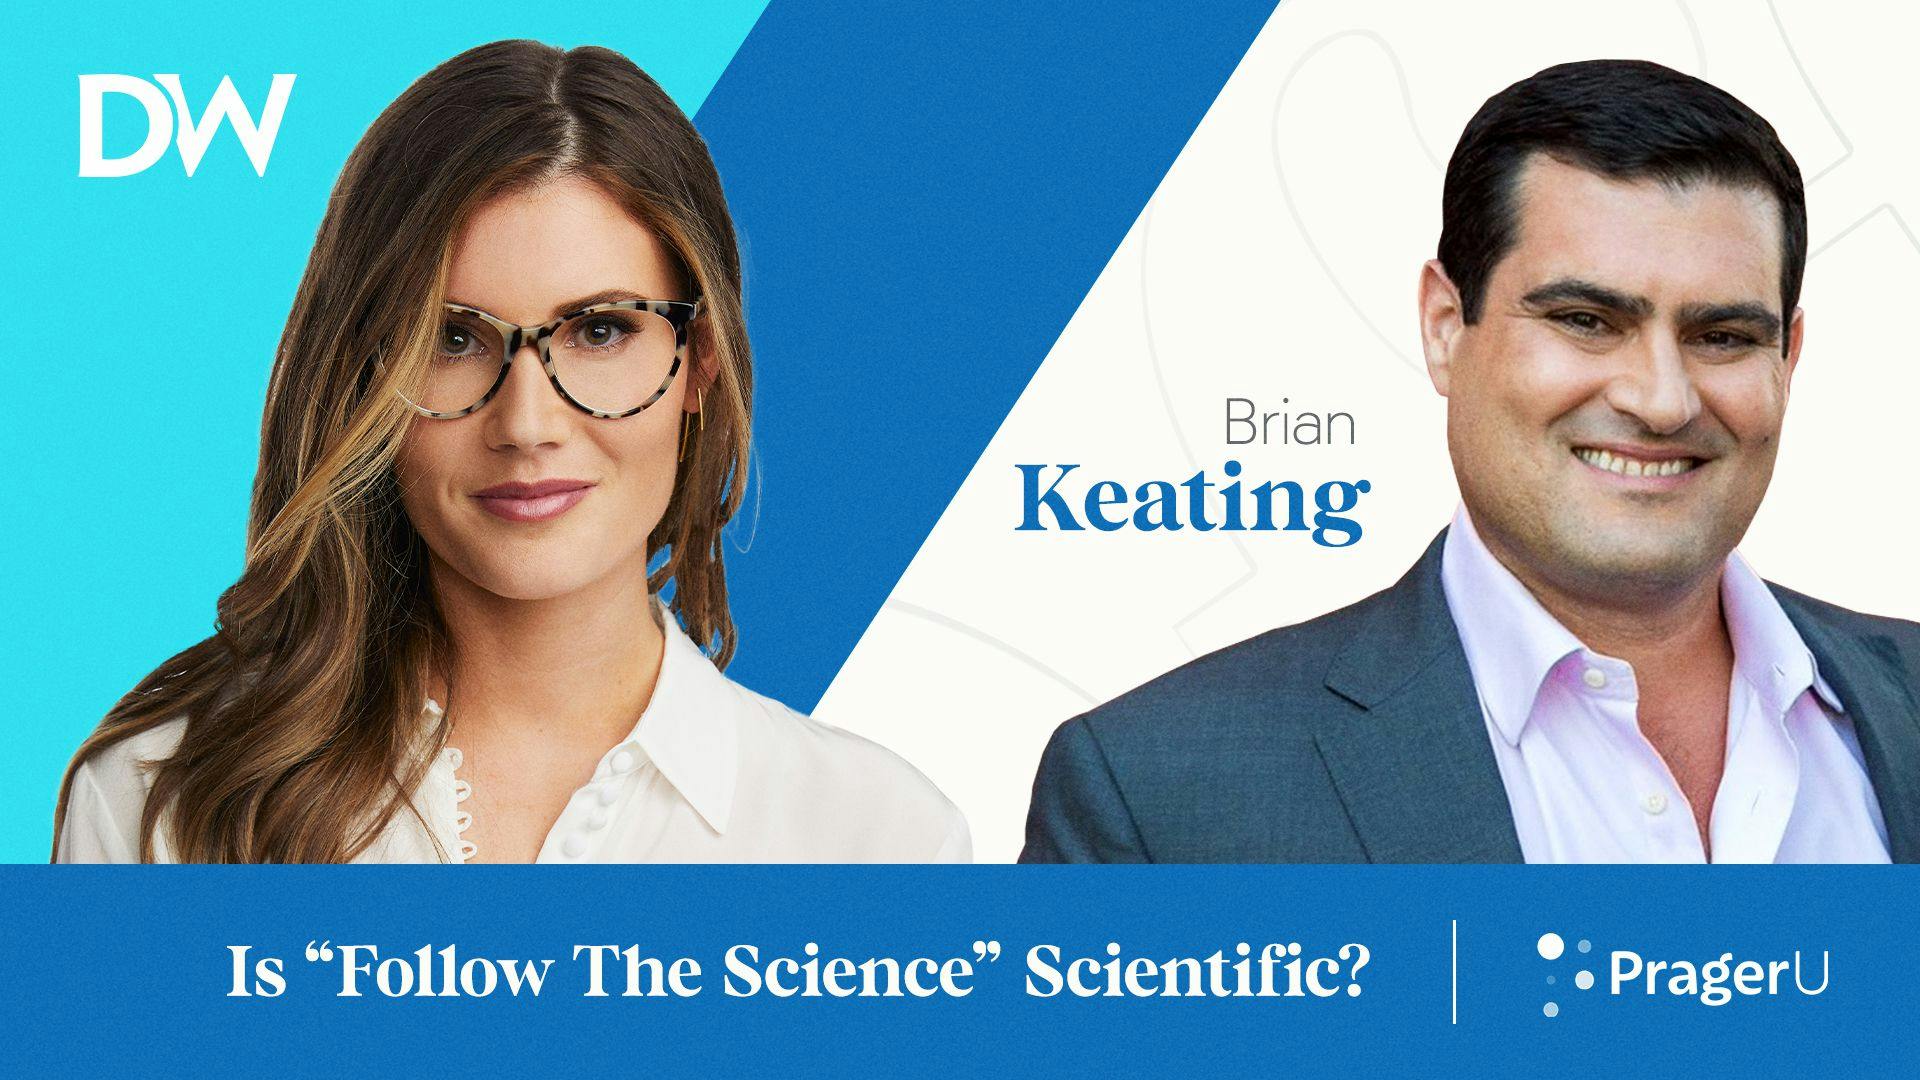 Is "Follow the Science" Scientific?